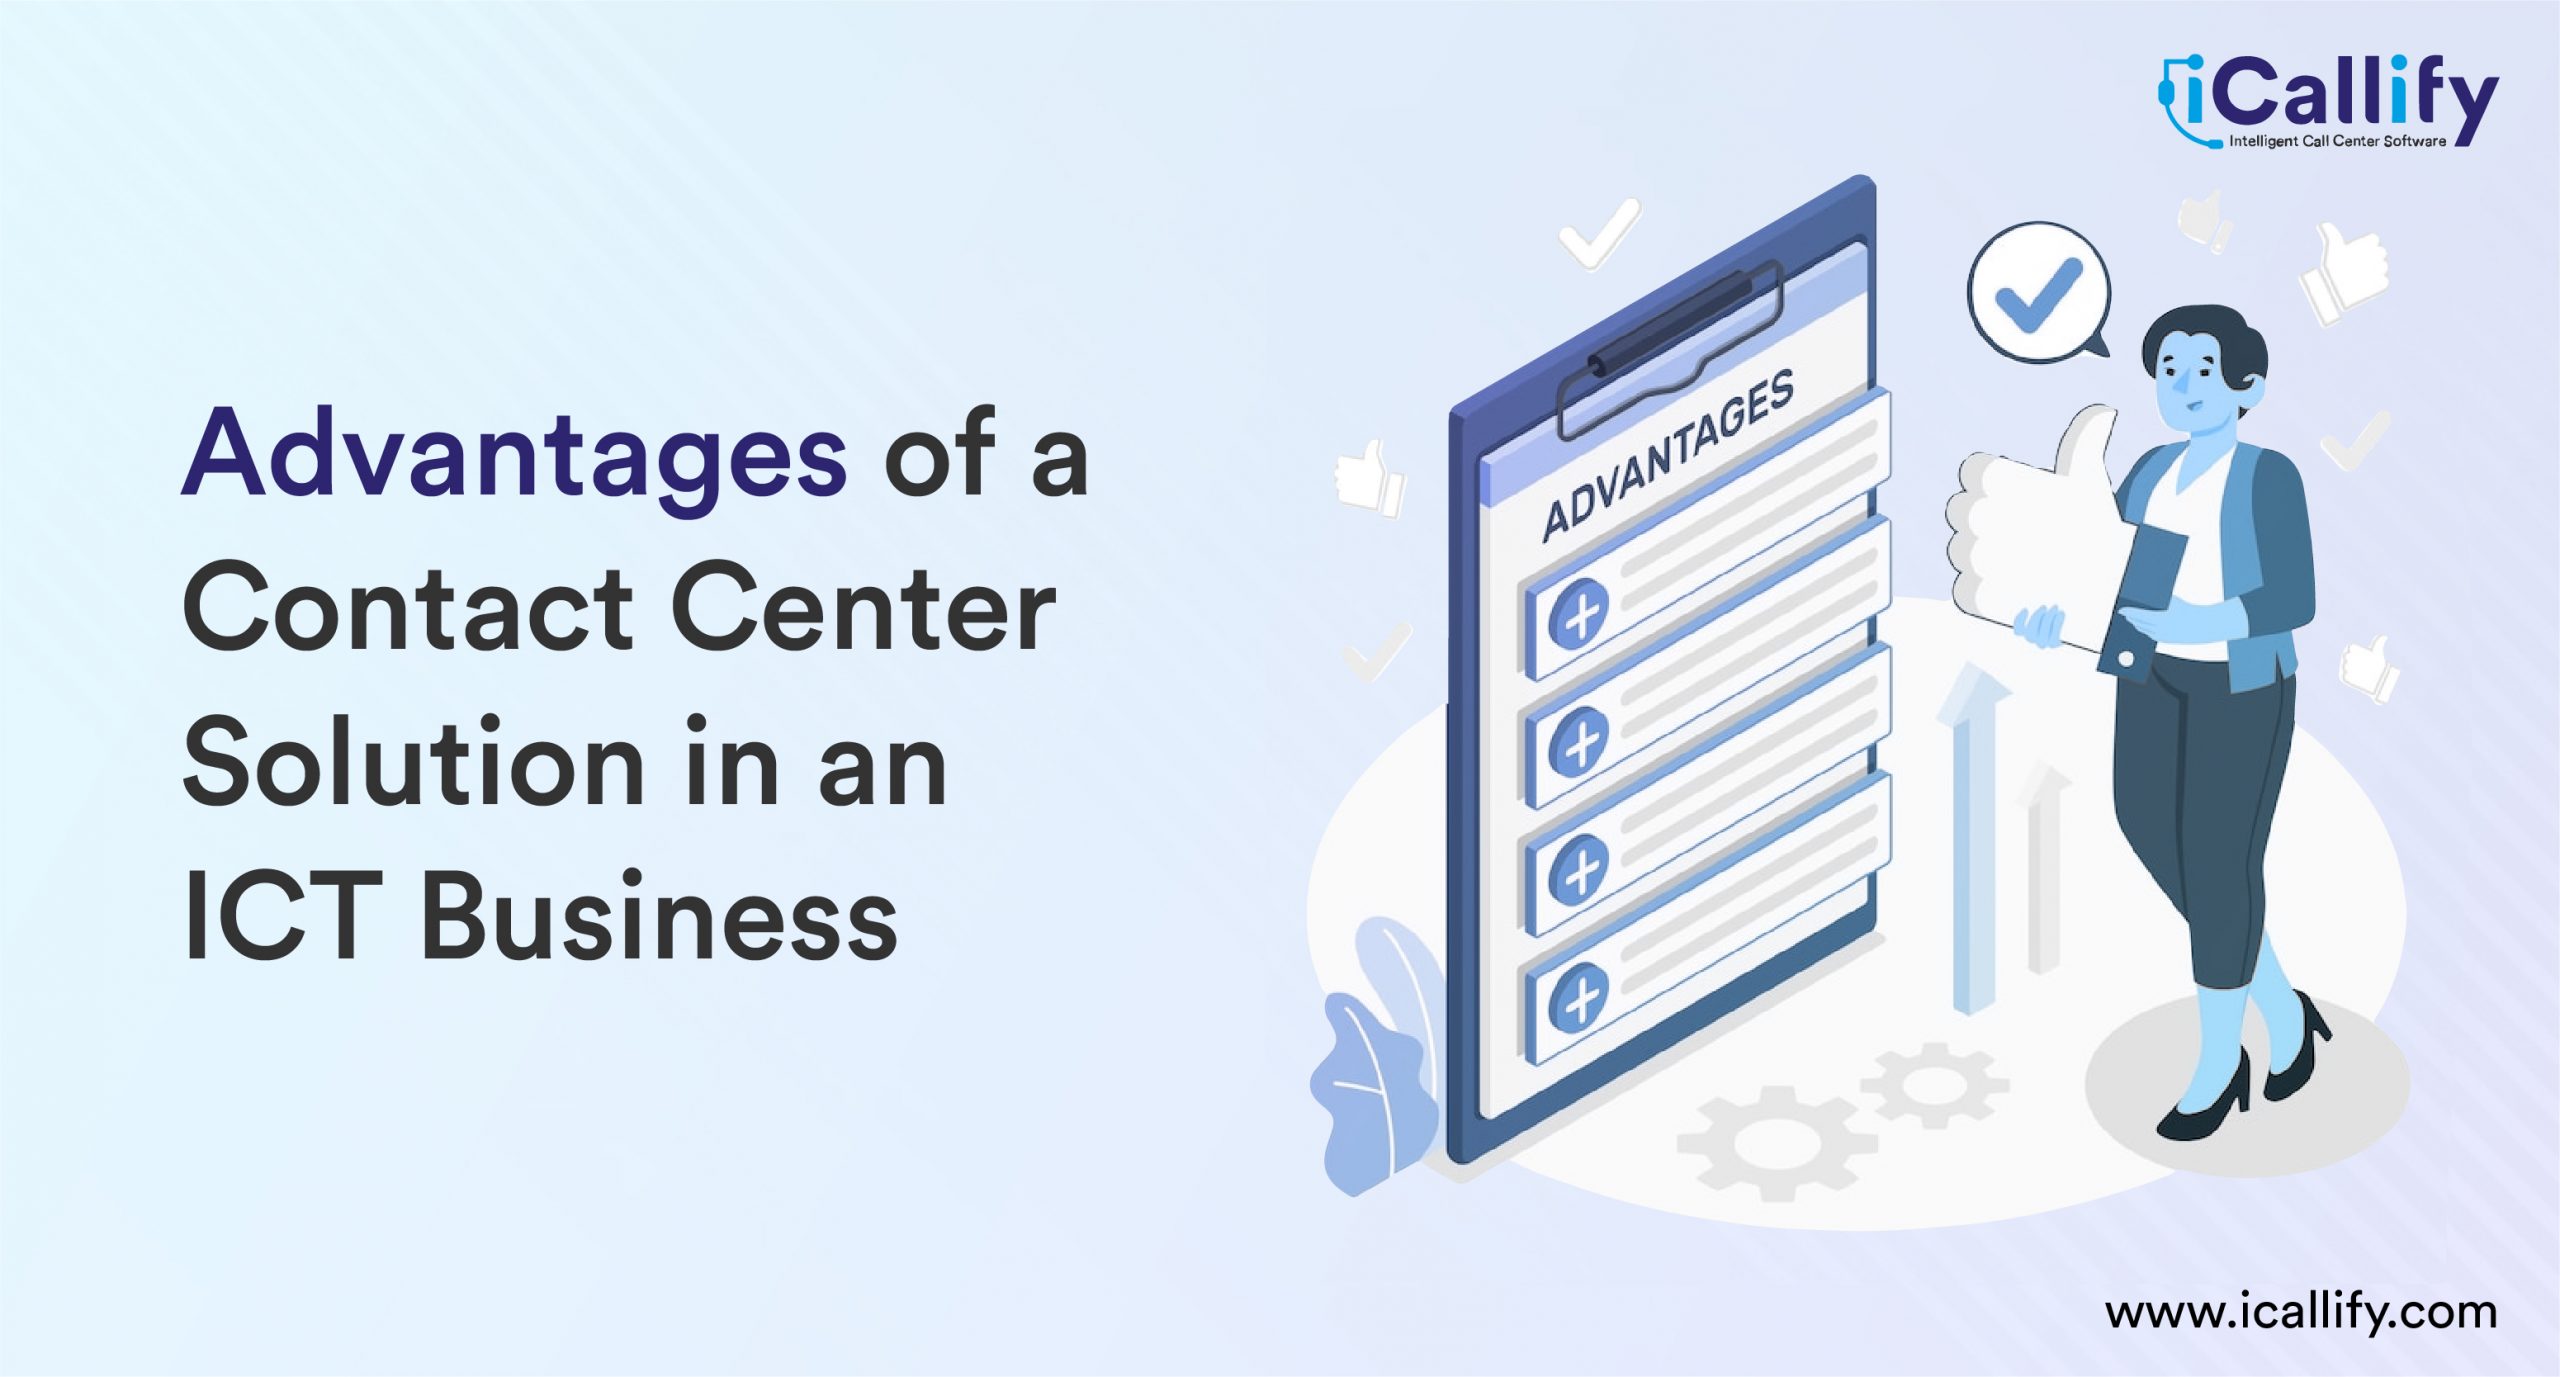 Advantages of a Contact Center Solution in an ICT Business